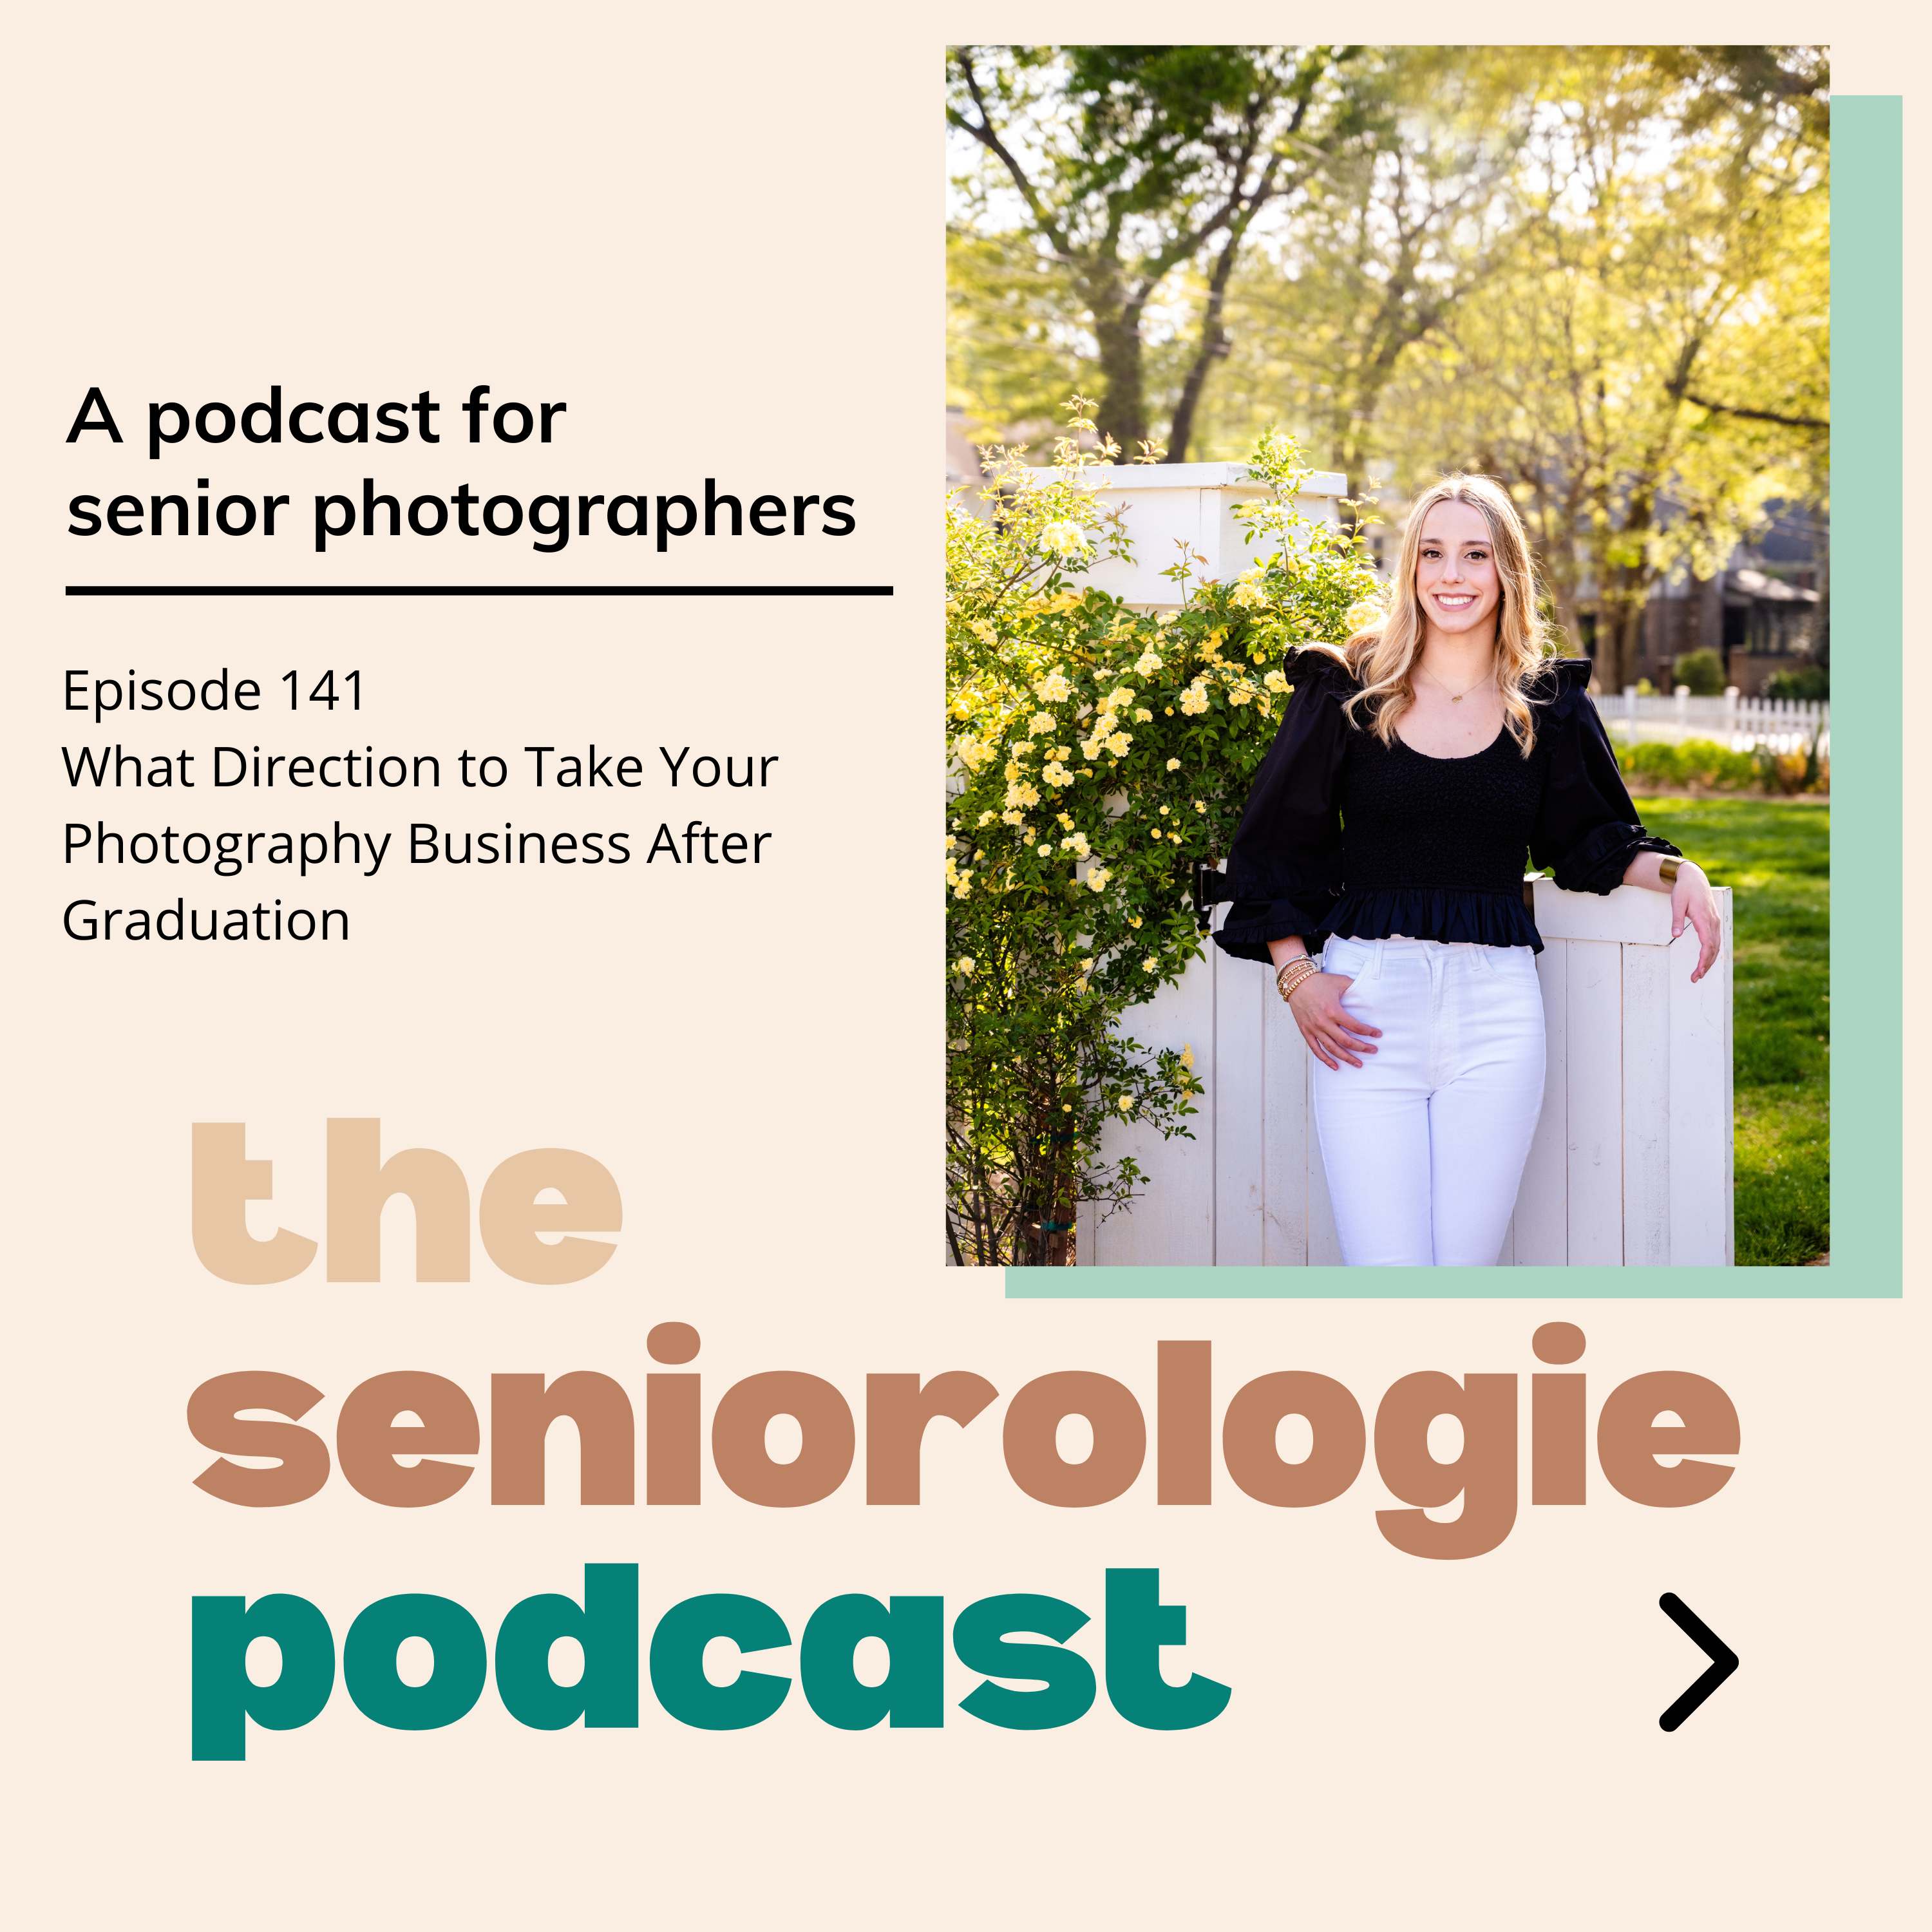 What Direction to Take Your Photography Business After Graduation